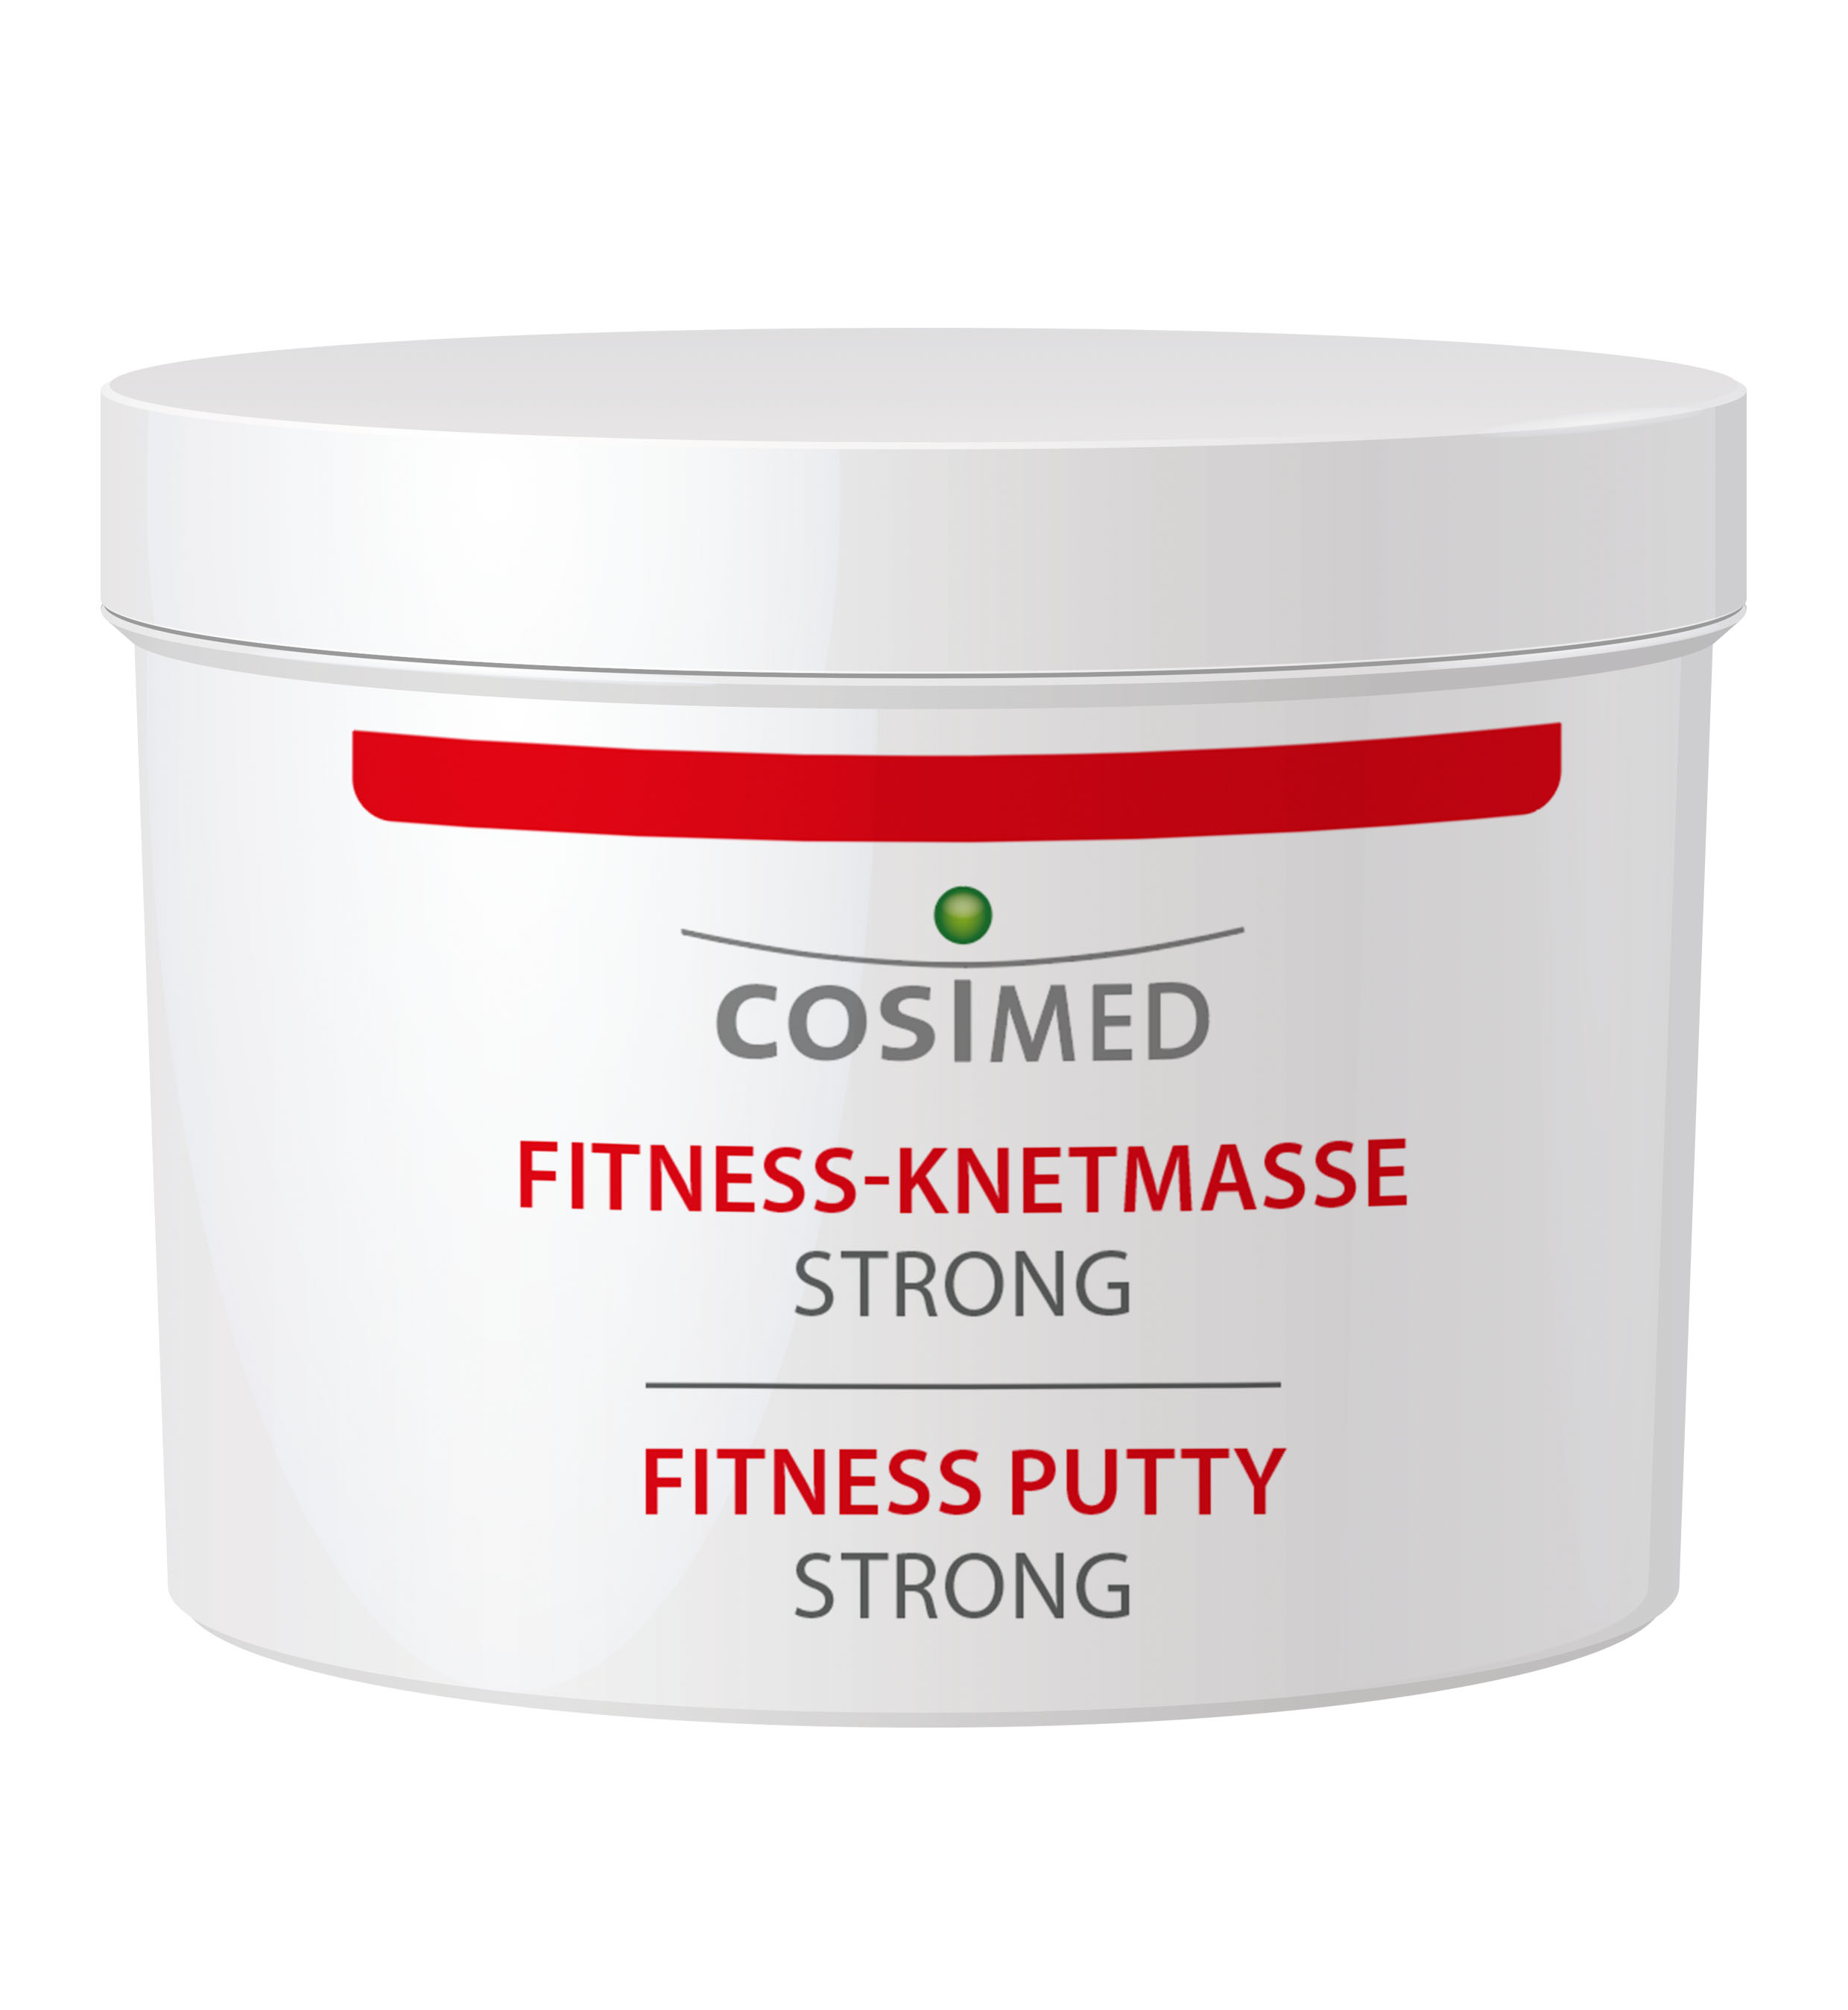 cosiMed Fitness-Knetmasse strong 85 g Dose